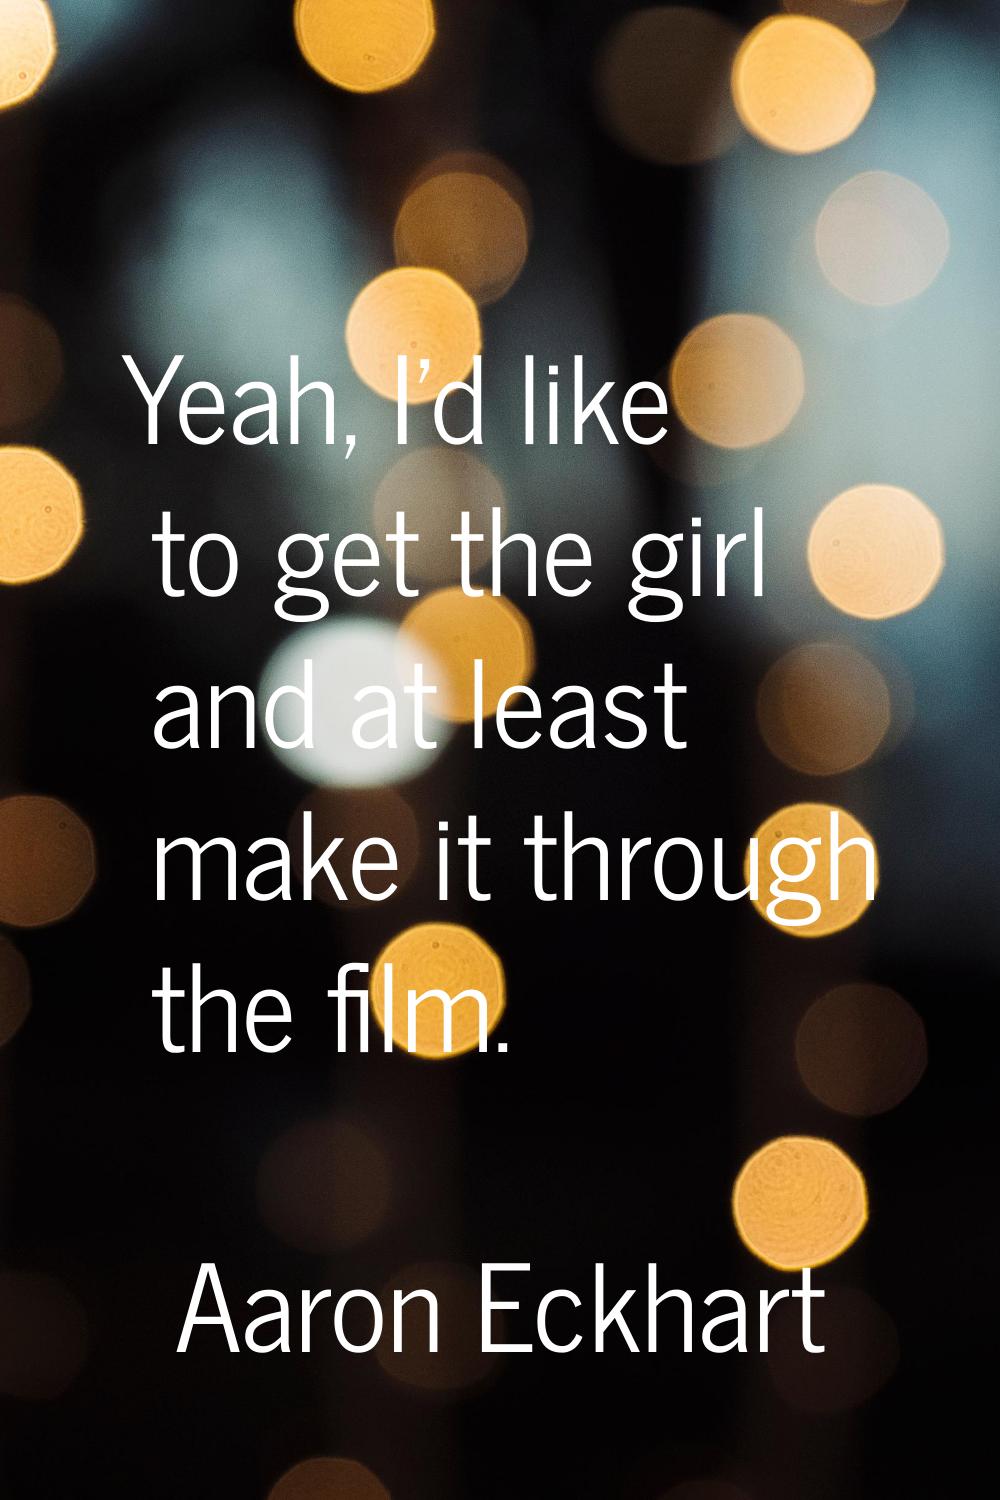 Yeah, I'd like to get the girl and at least make it through the film.